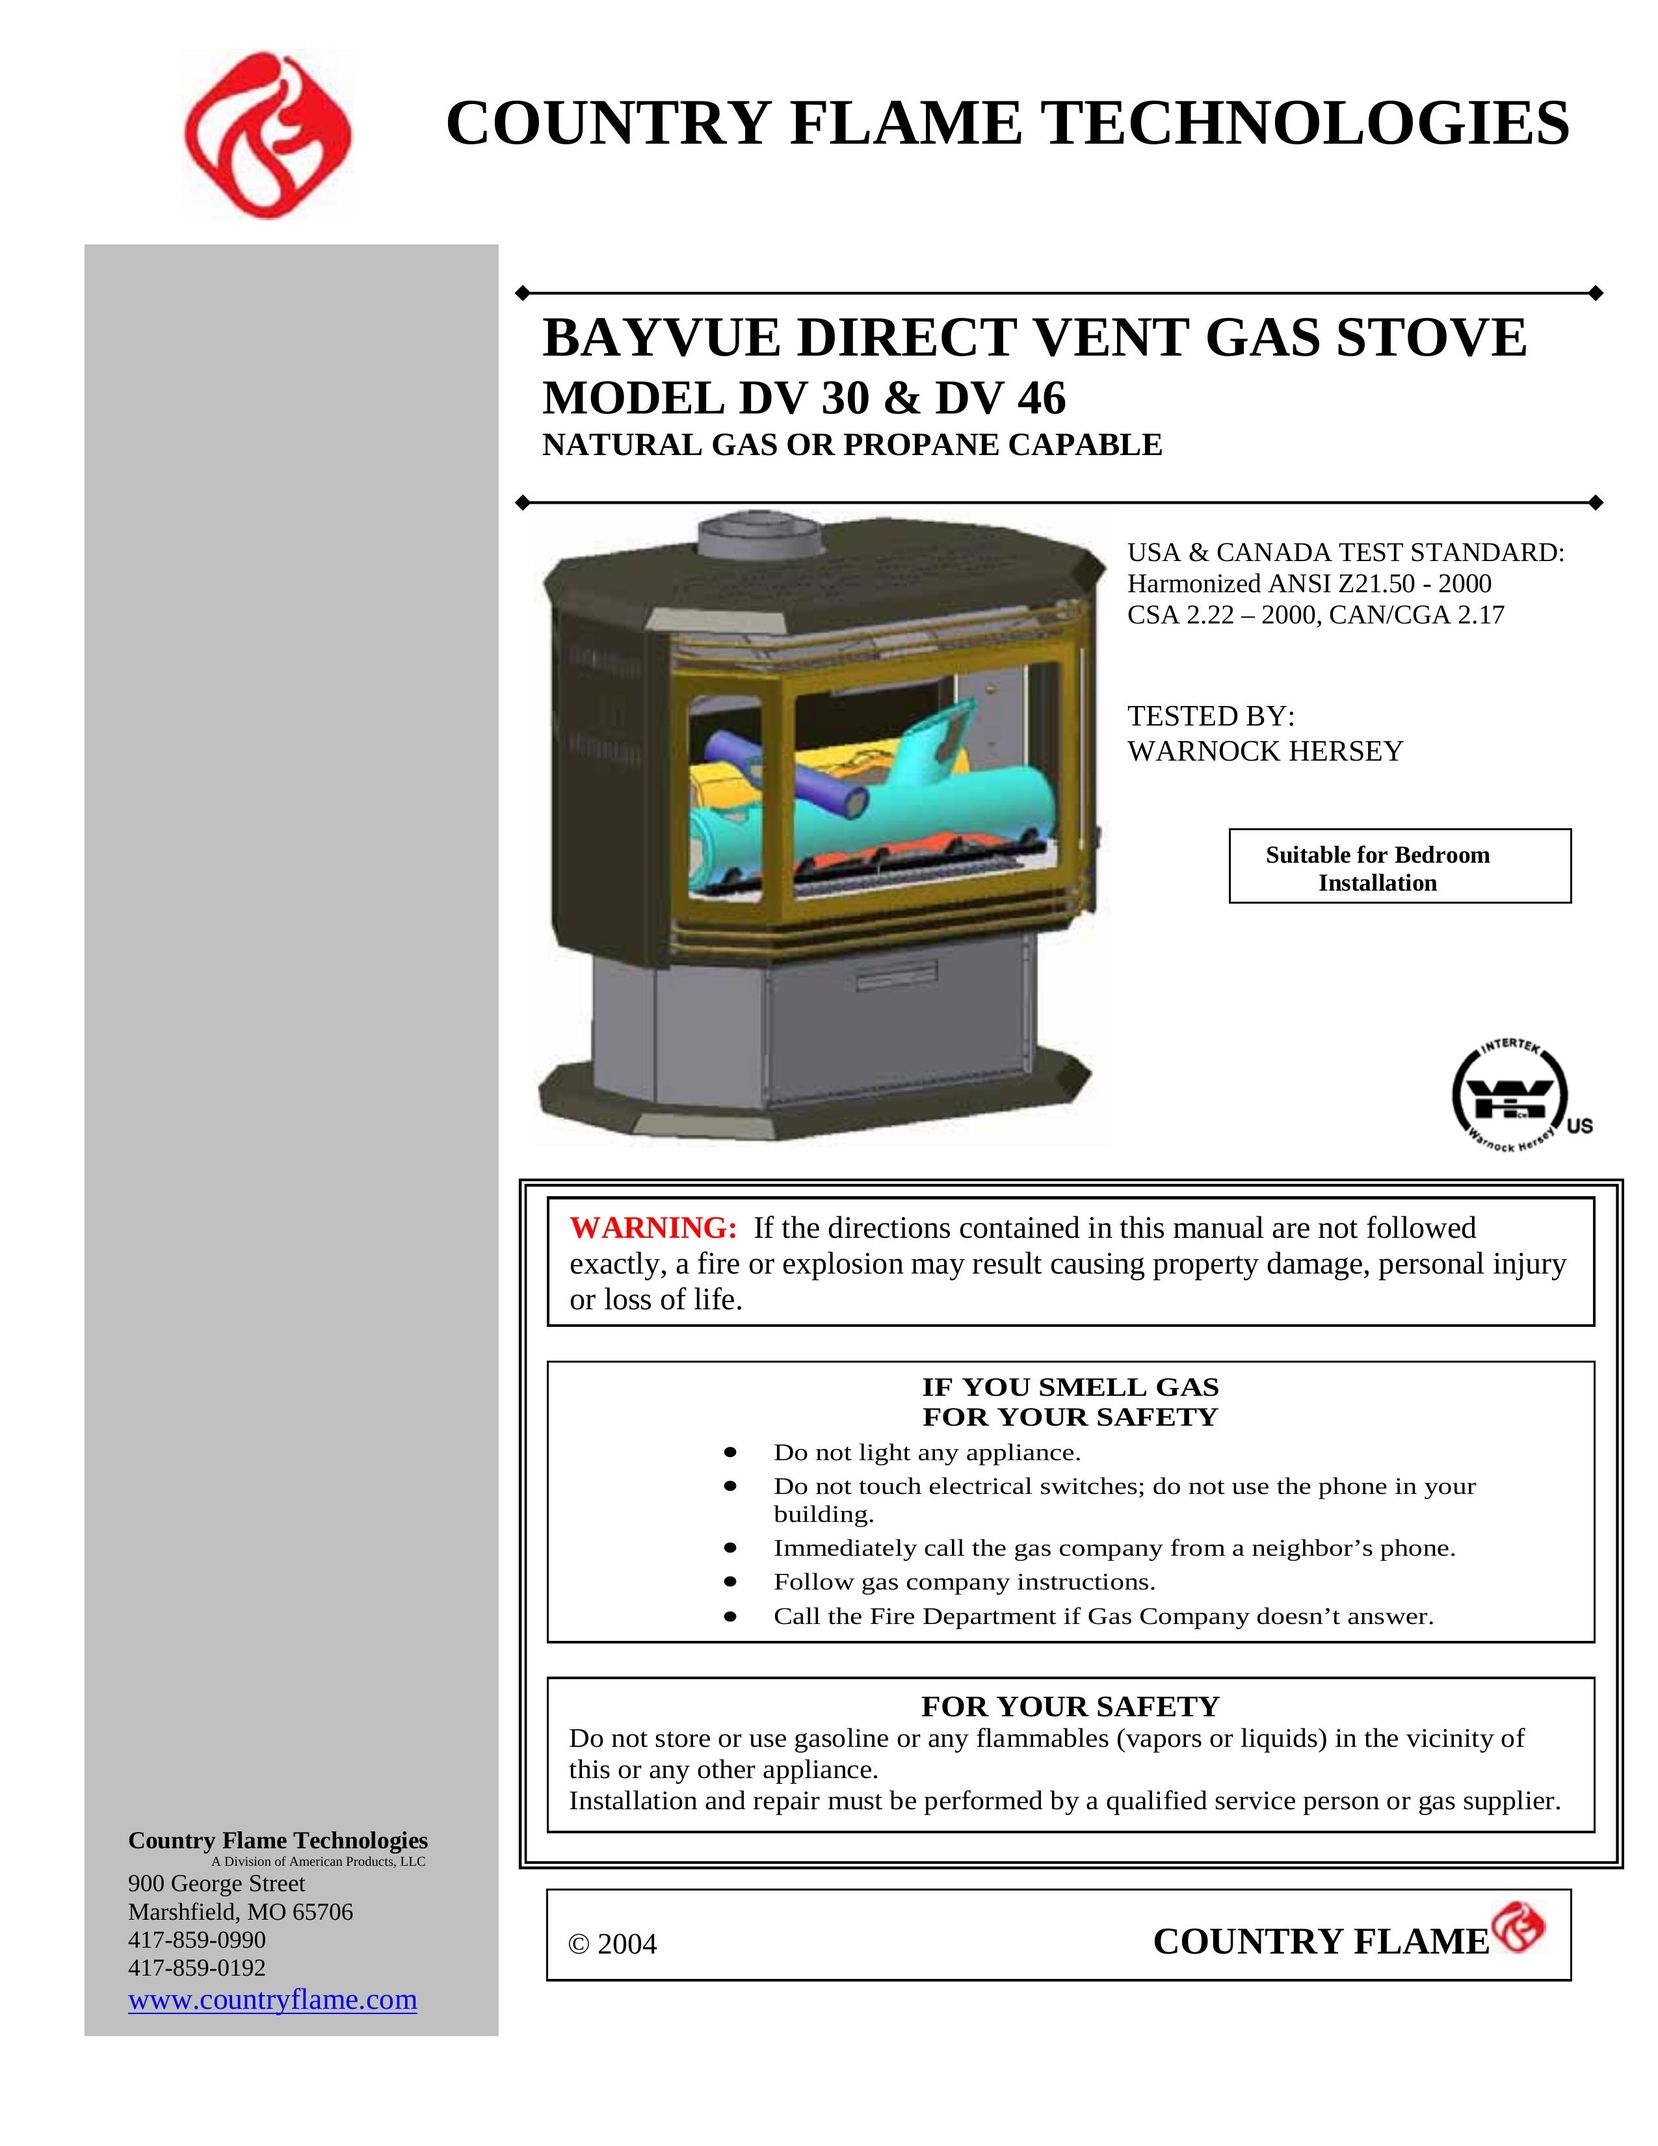 Country Flame DV 46 Stove User Manual